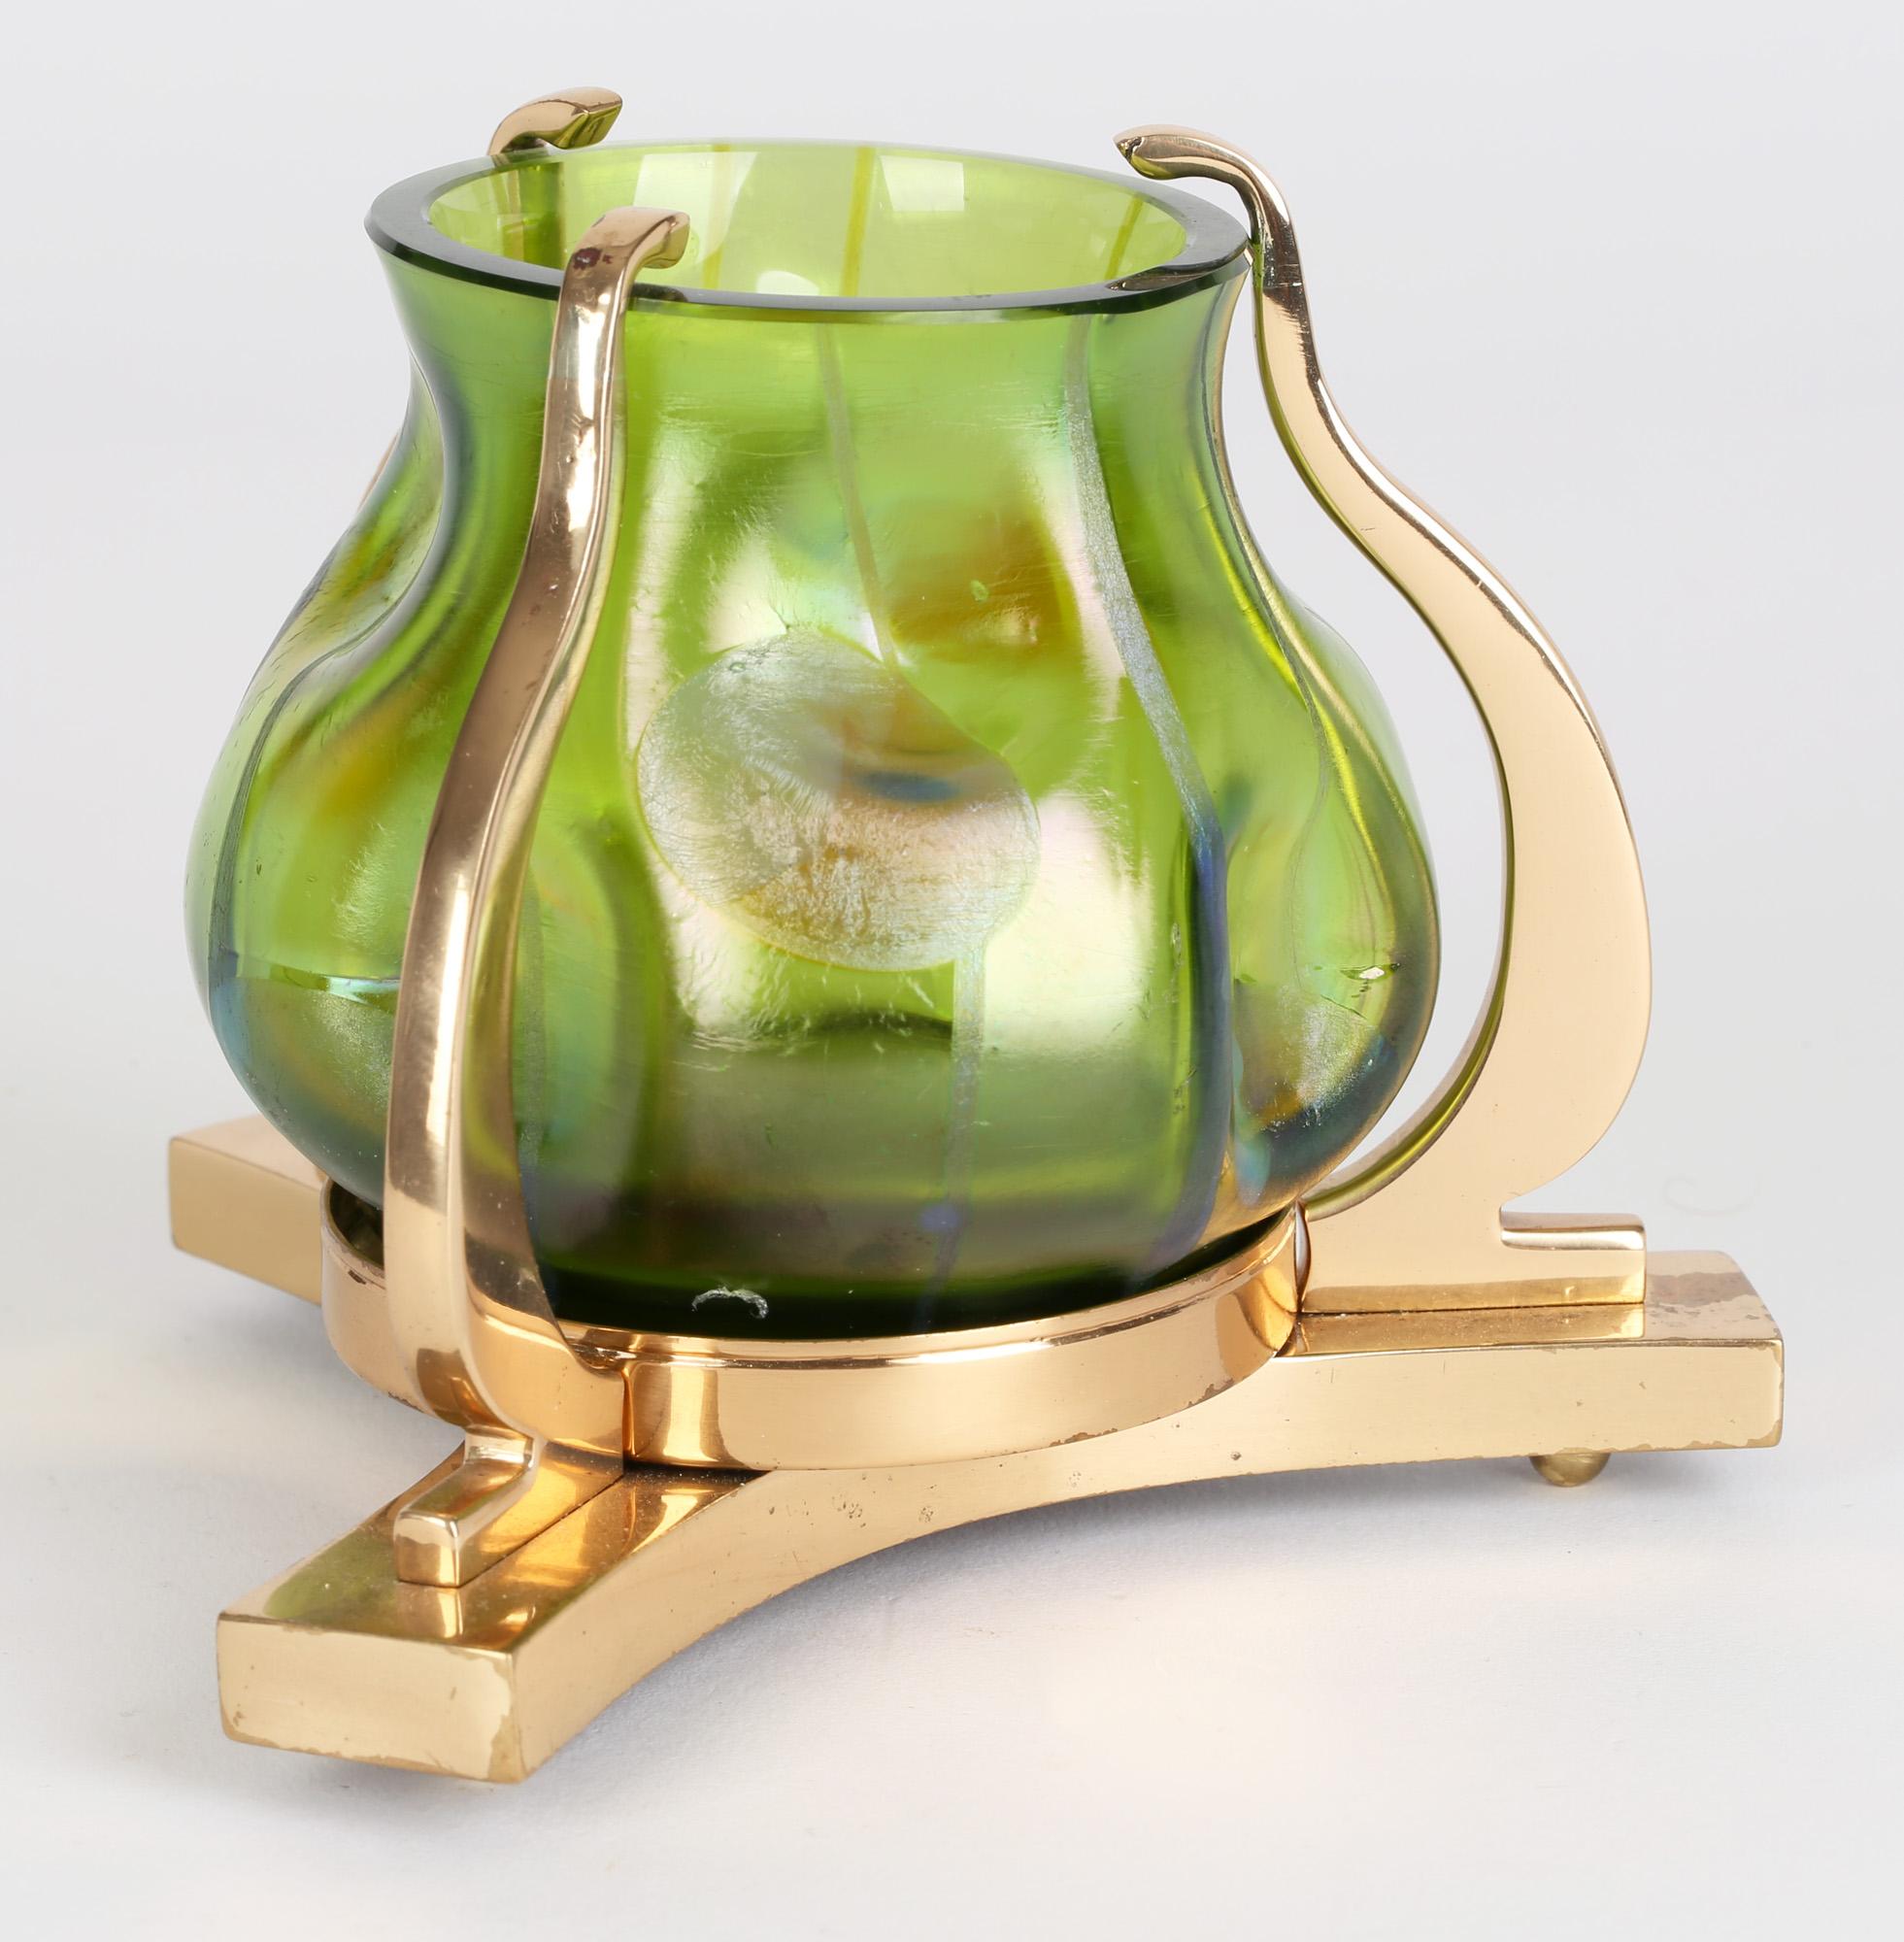 Stunning Bohemian Secessionist brass mounted glass vase with 'Streifen und Flecken' decoration by Loetz and dating from around 1900. The thickly made green glass vase has a dimpled body and decorated with subtle stripes and circle. The glass is